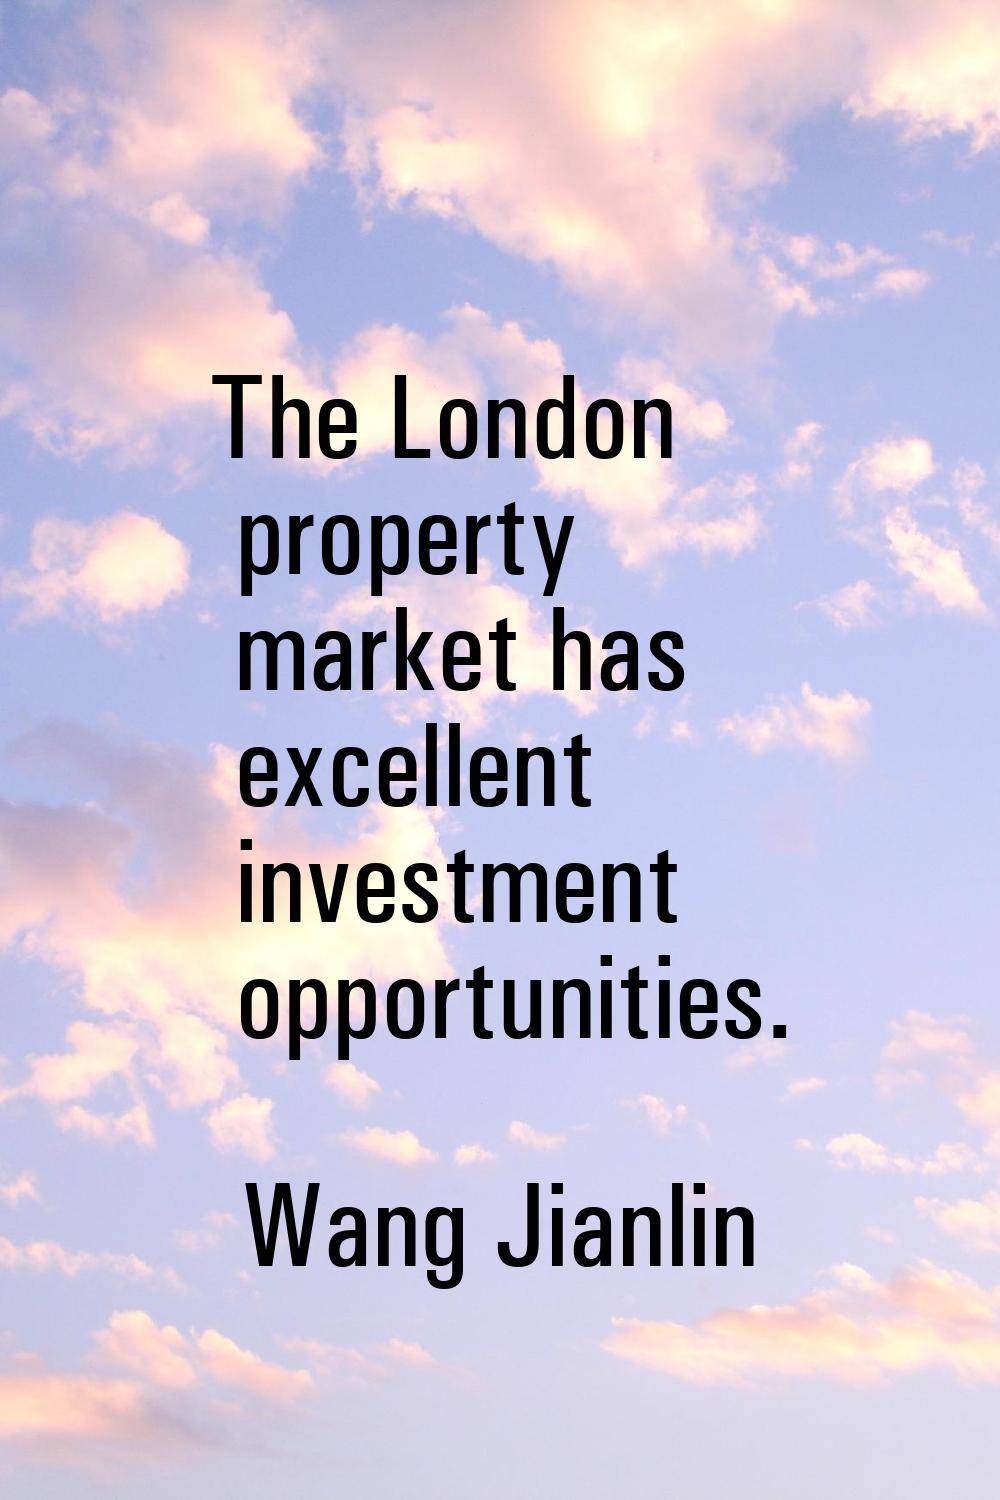 The London property market has excellent investment opportunities.